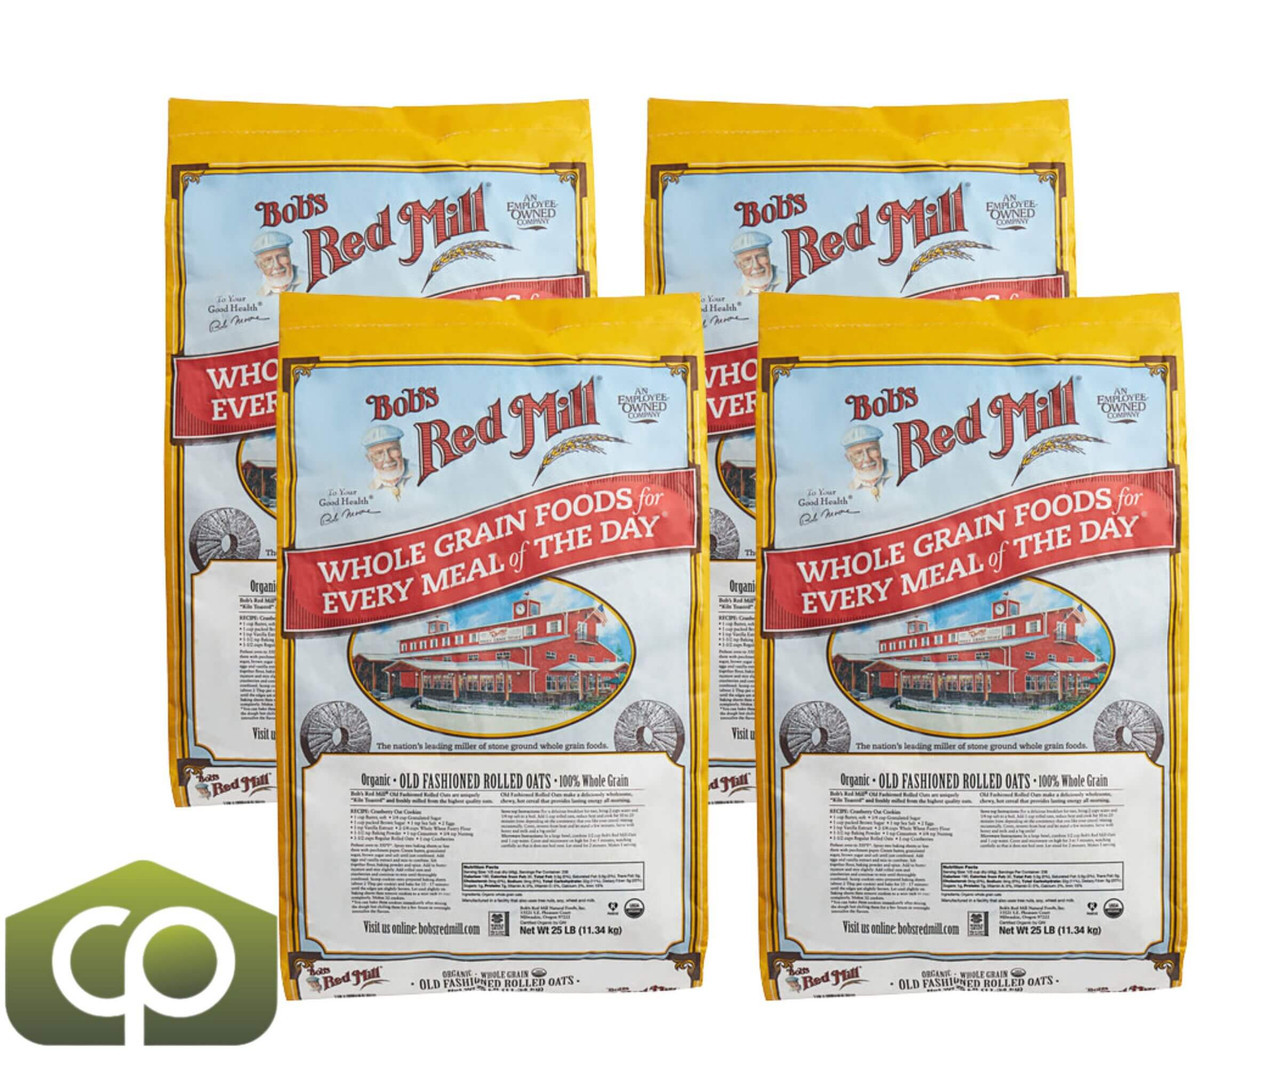 Bob's Red Mill 25 lb. (11.34 kg) Organic Whole Grain Rolled Oats (60 BAGS/PALLET) - Chicken Pieces